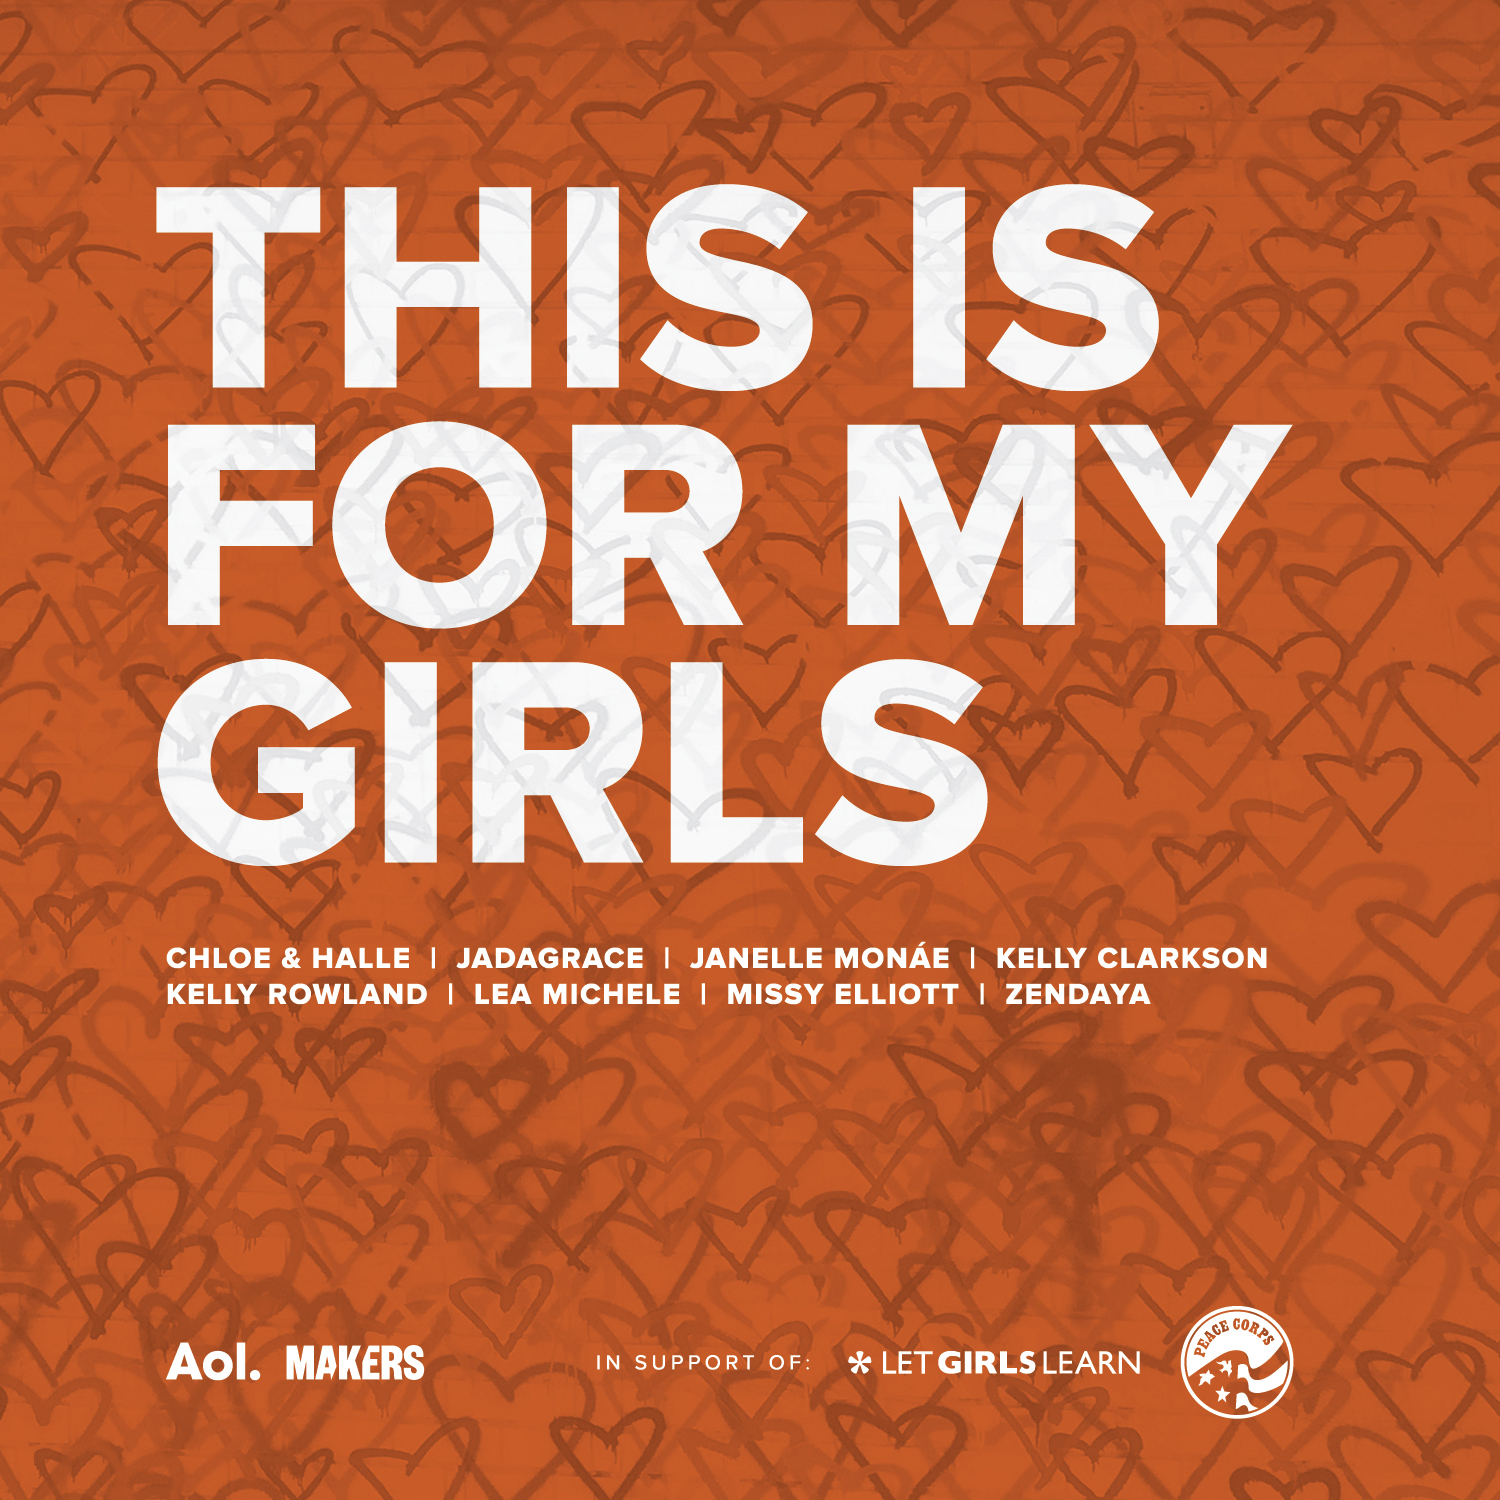 New Music: Michelle Obama – 'This is For My Girls' (Feat. Various Artists) | HipHop ...1500 x 1500